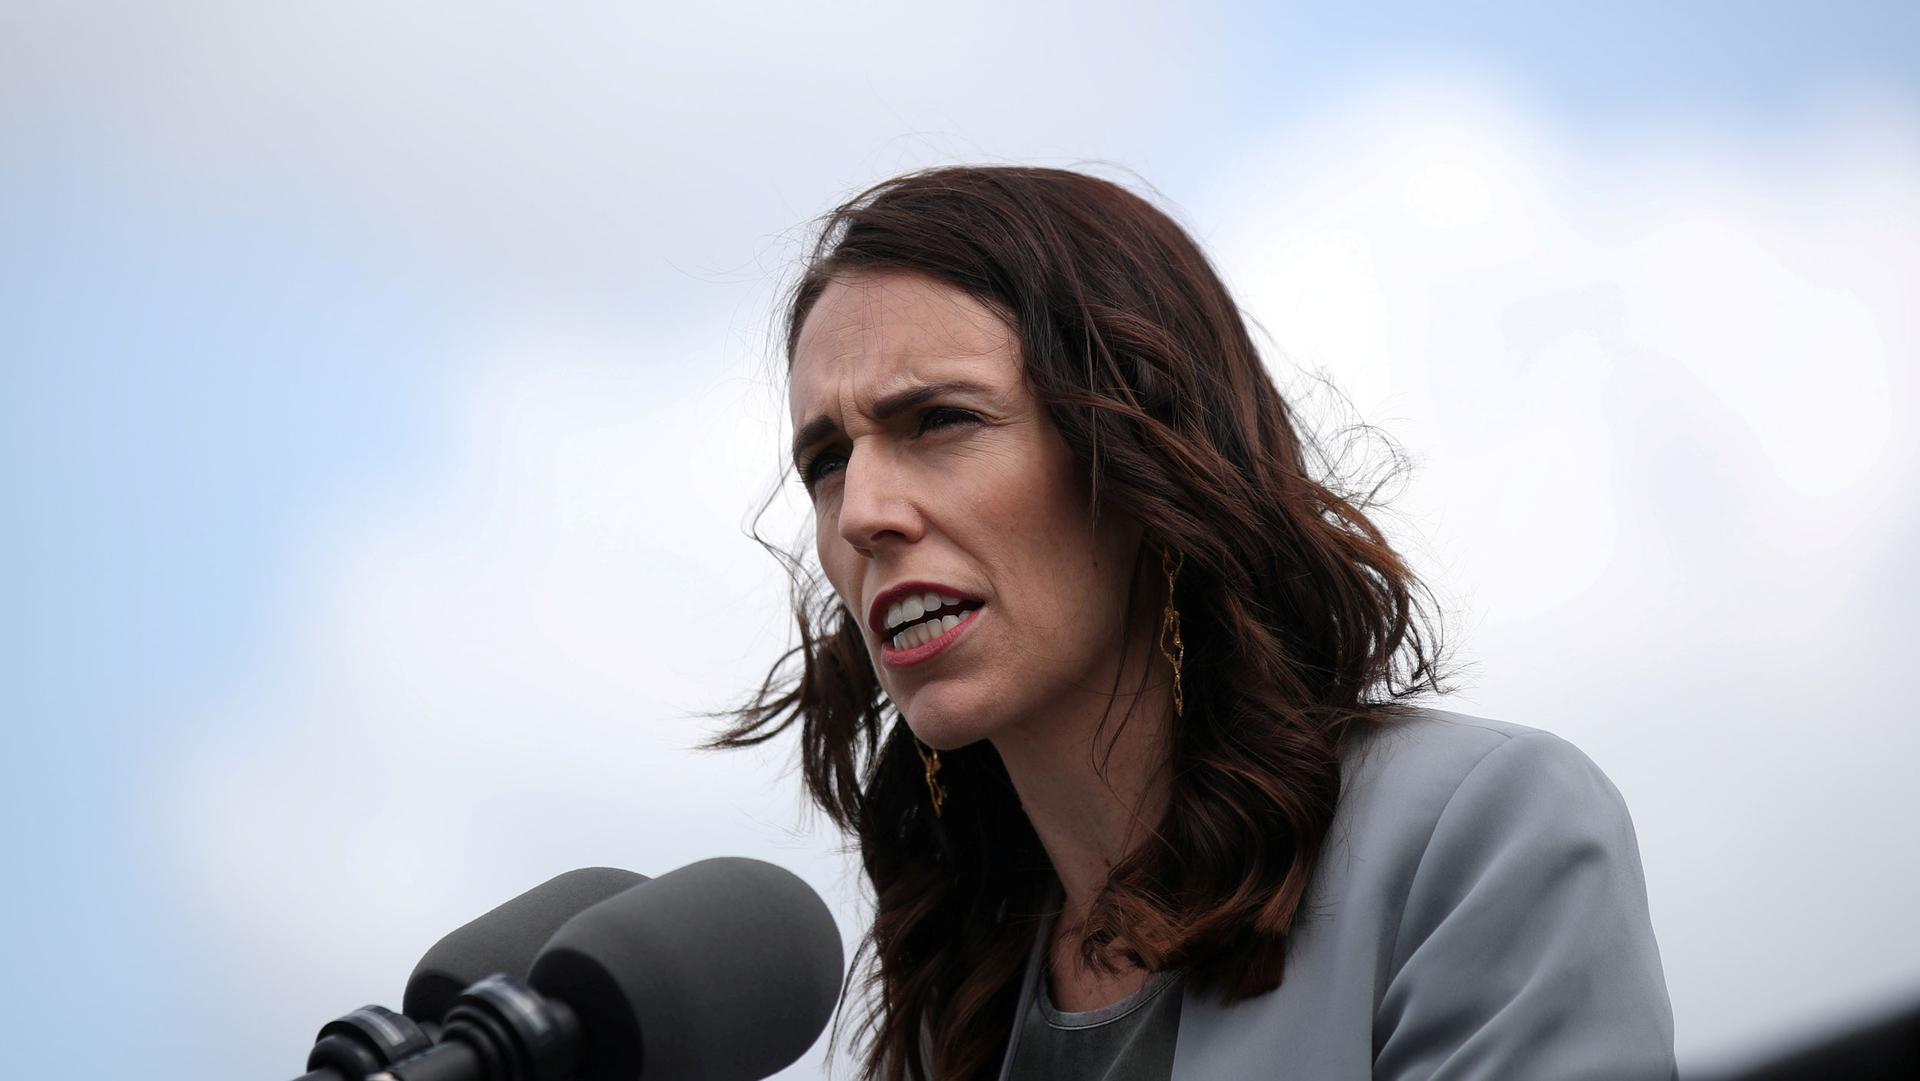 New Zealand Prime Minister Jacinda Ardern is shown outside wearing a gray jacket and speaking into two microphones.